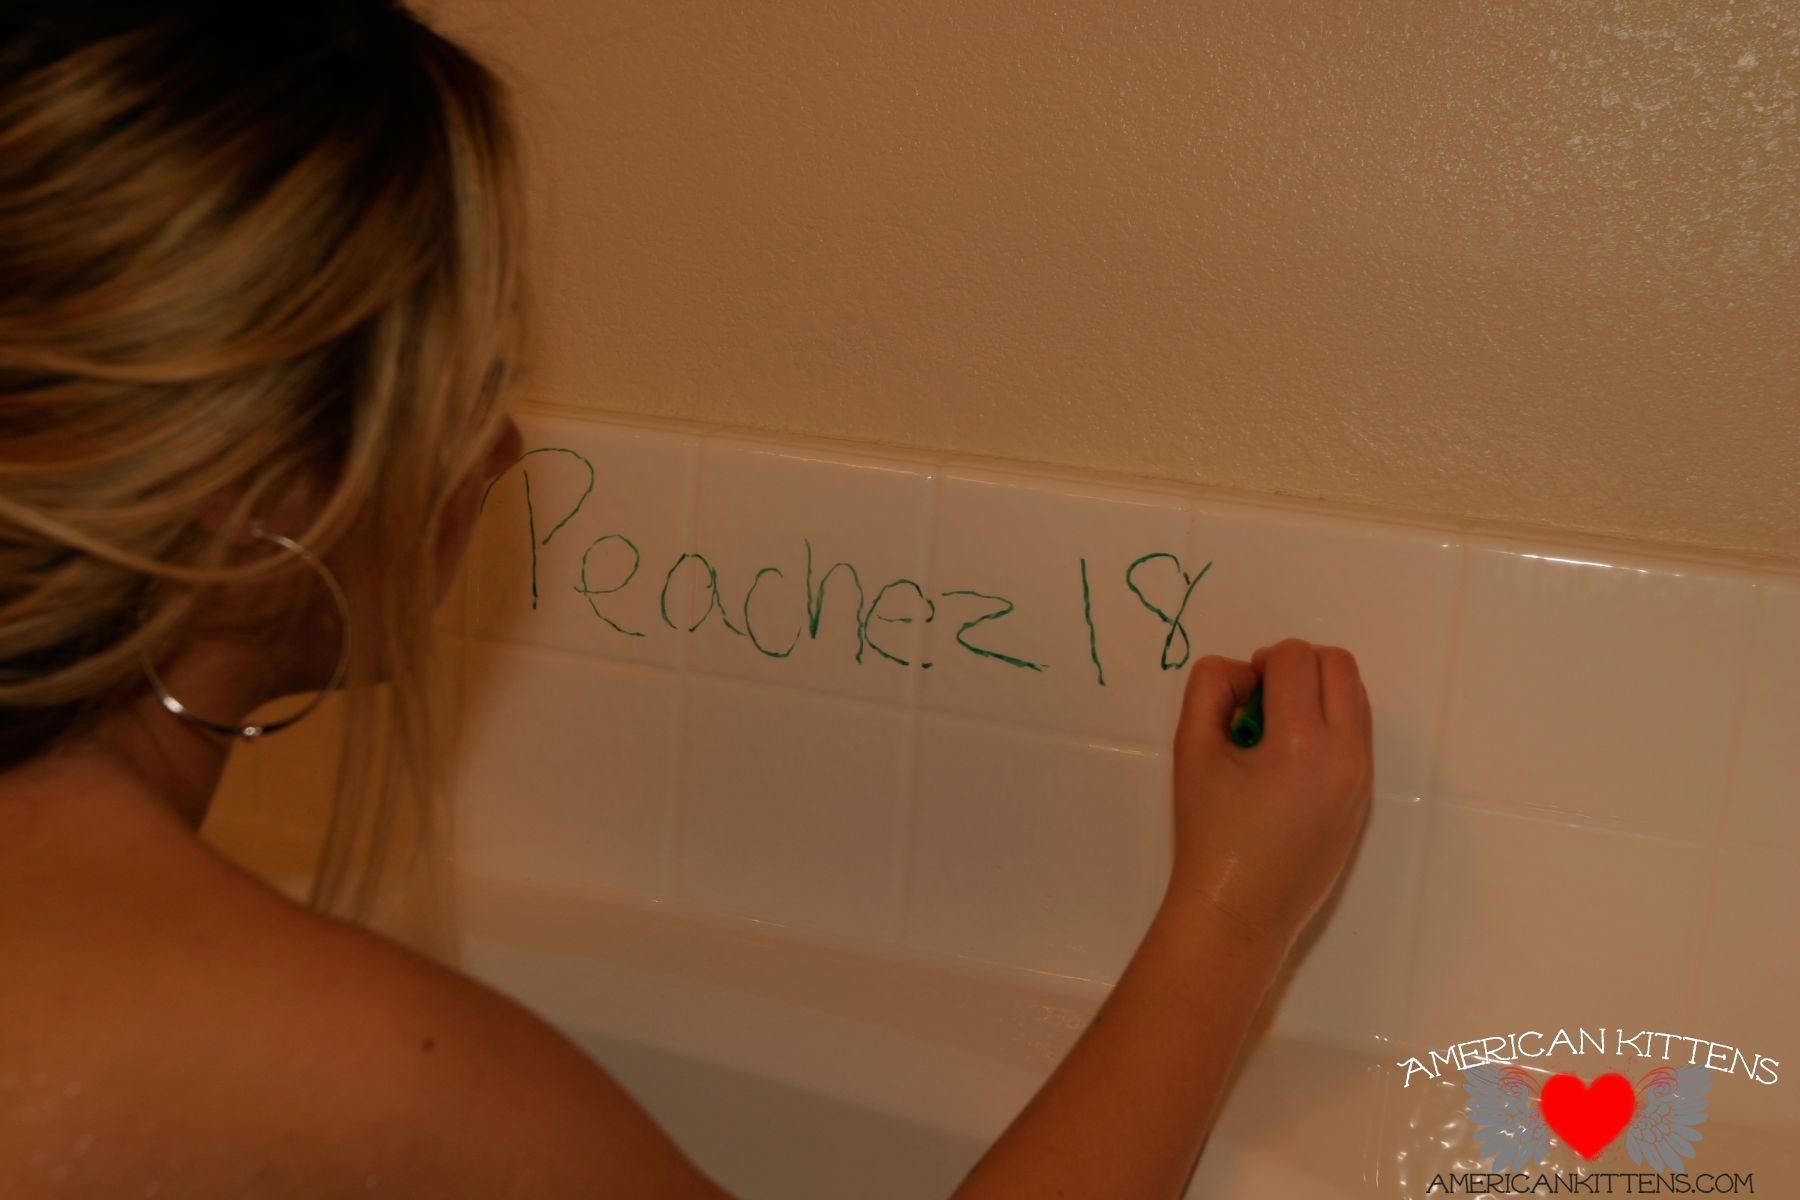 Pictures of Sarah Peachez celebrating St. Patty's in the bath tub #61943592